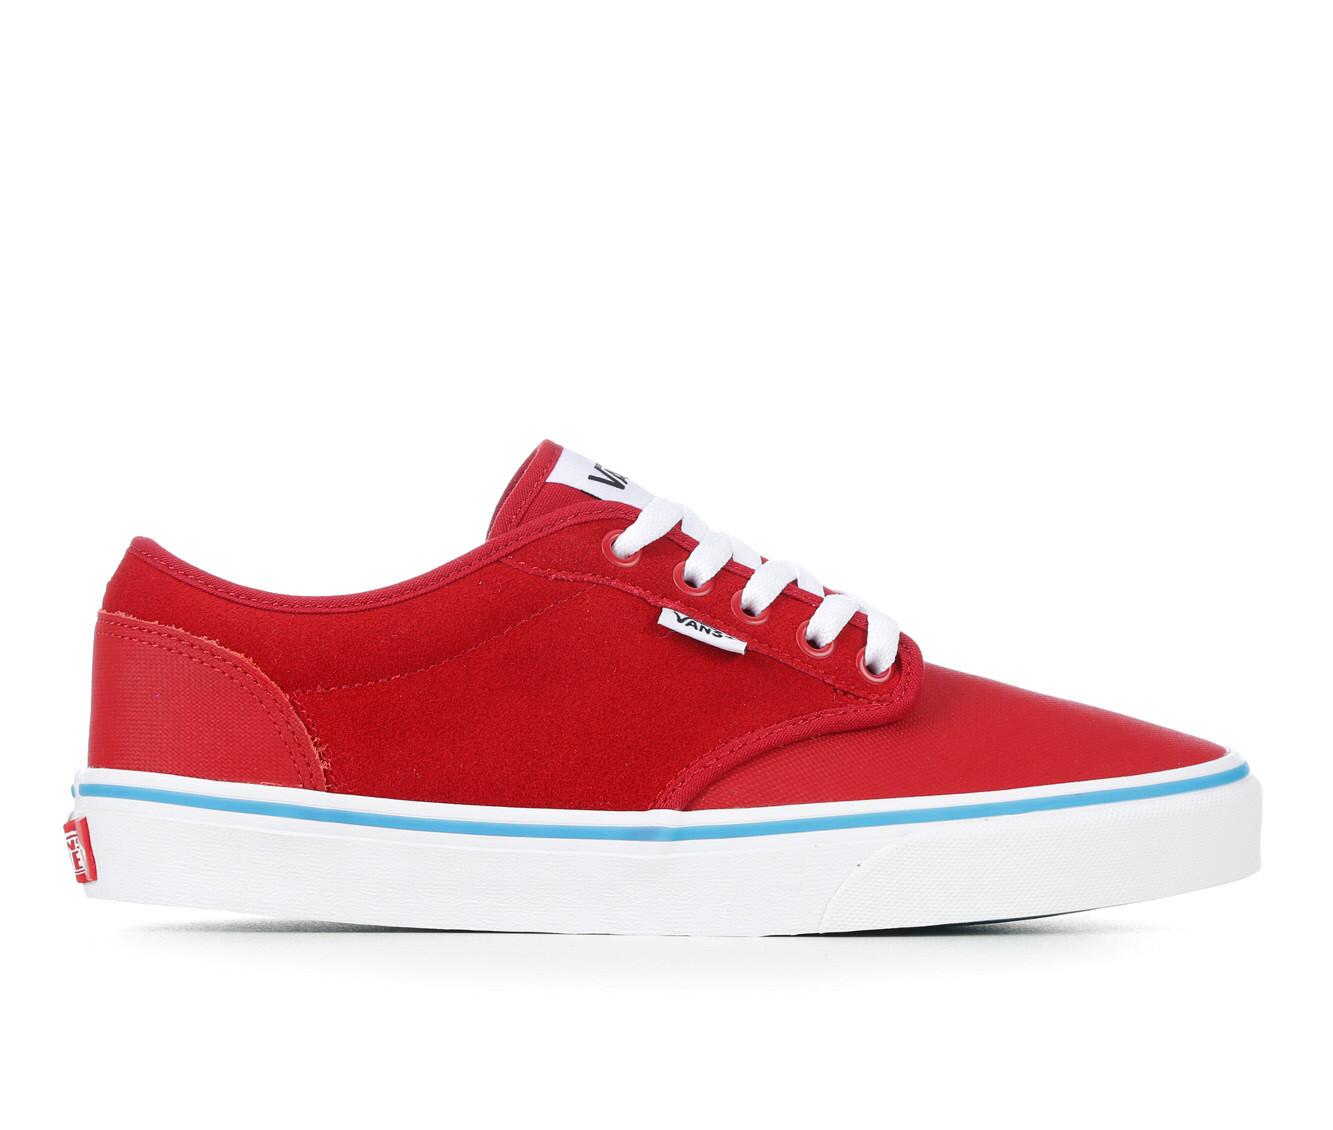 Conciso Oso polar inicial Men's Vans Atwood Skate Shoes | Shoe Carnival